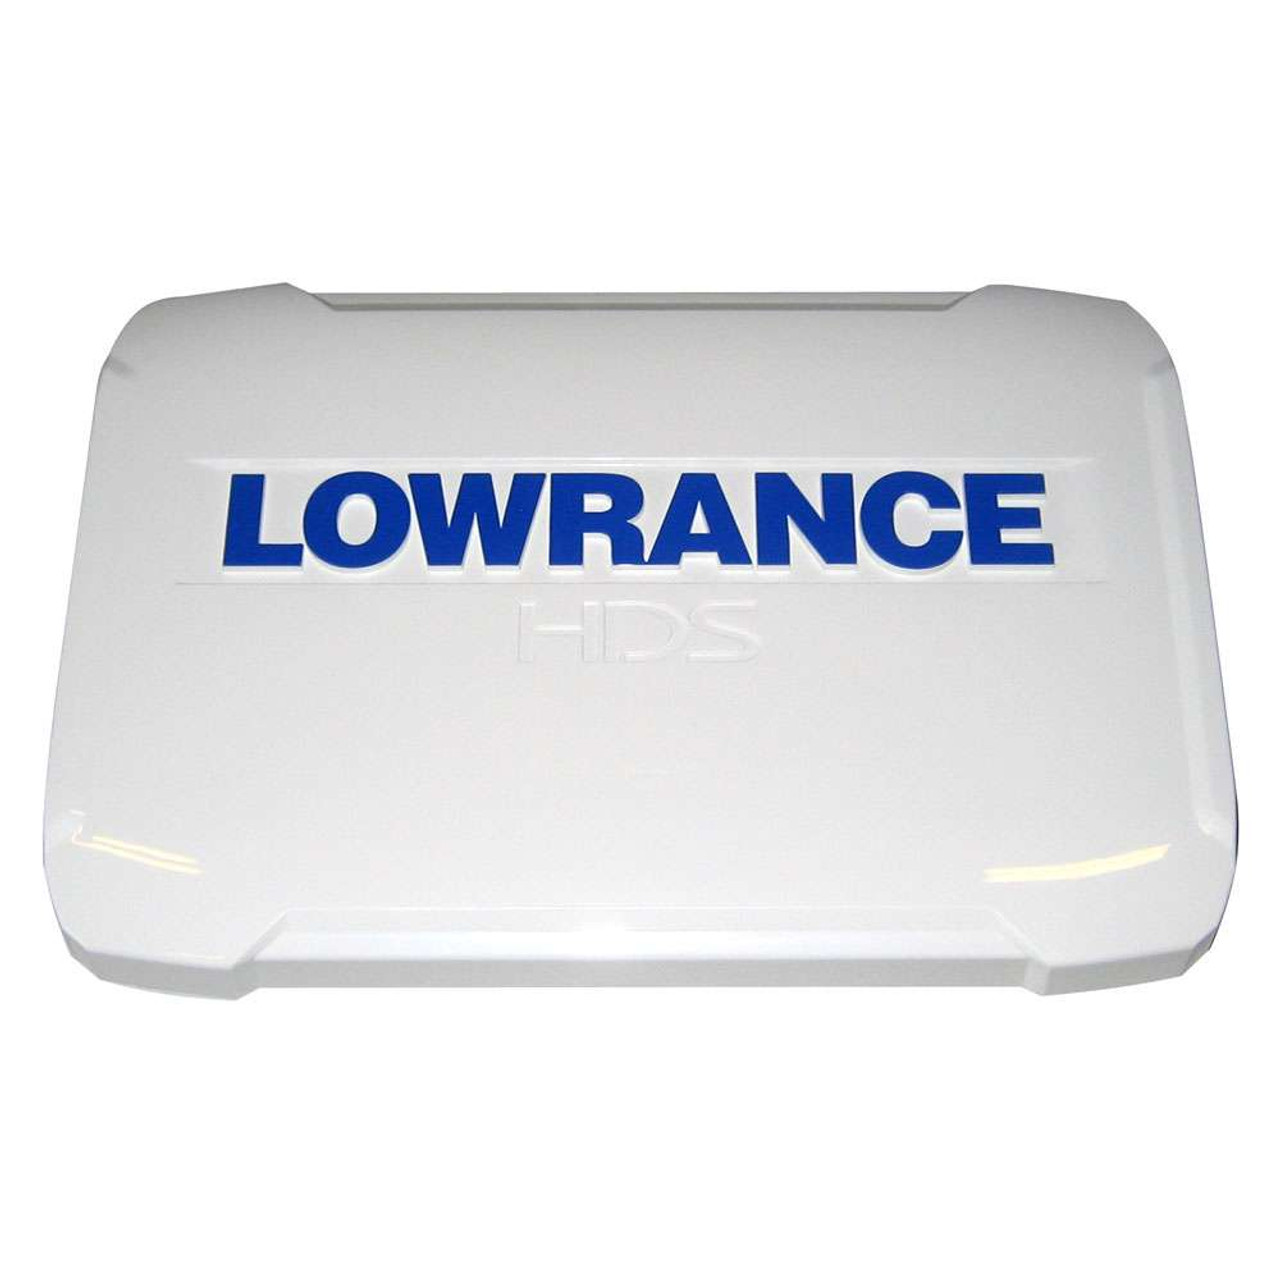 Lowrance 000-11030-001 Sun Cover f/ HDS-7 GEN2 Touch - TackleDirect